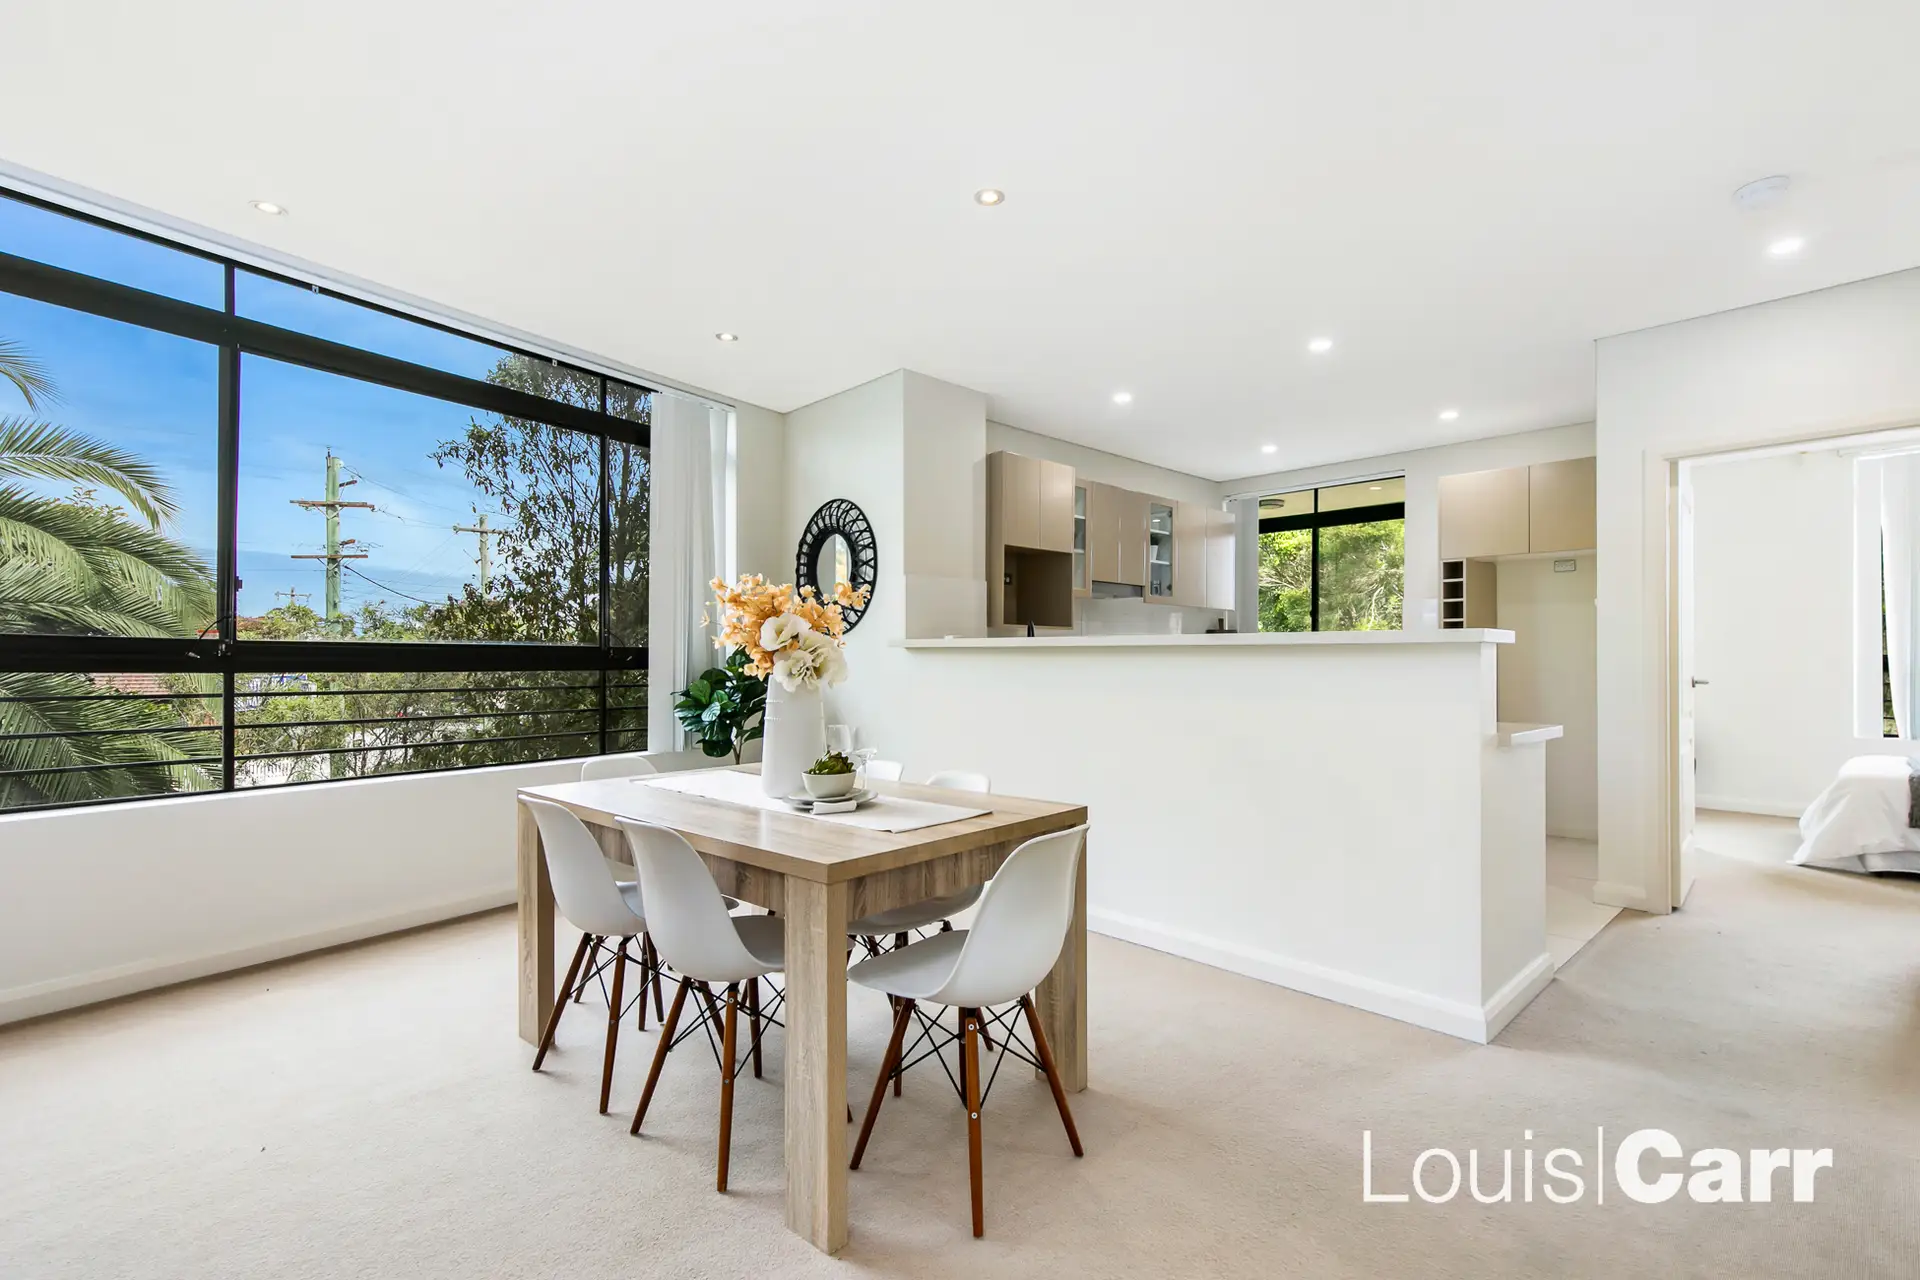 Photo #2: 101/2-4 Purser Avenue, Castle Hill - Sold by Louis Carr Real Estate